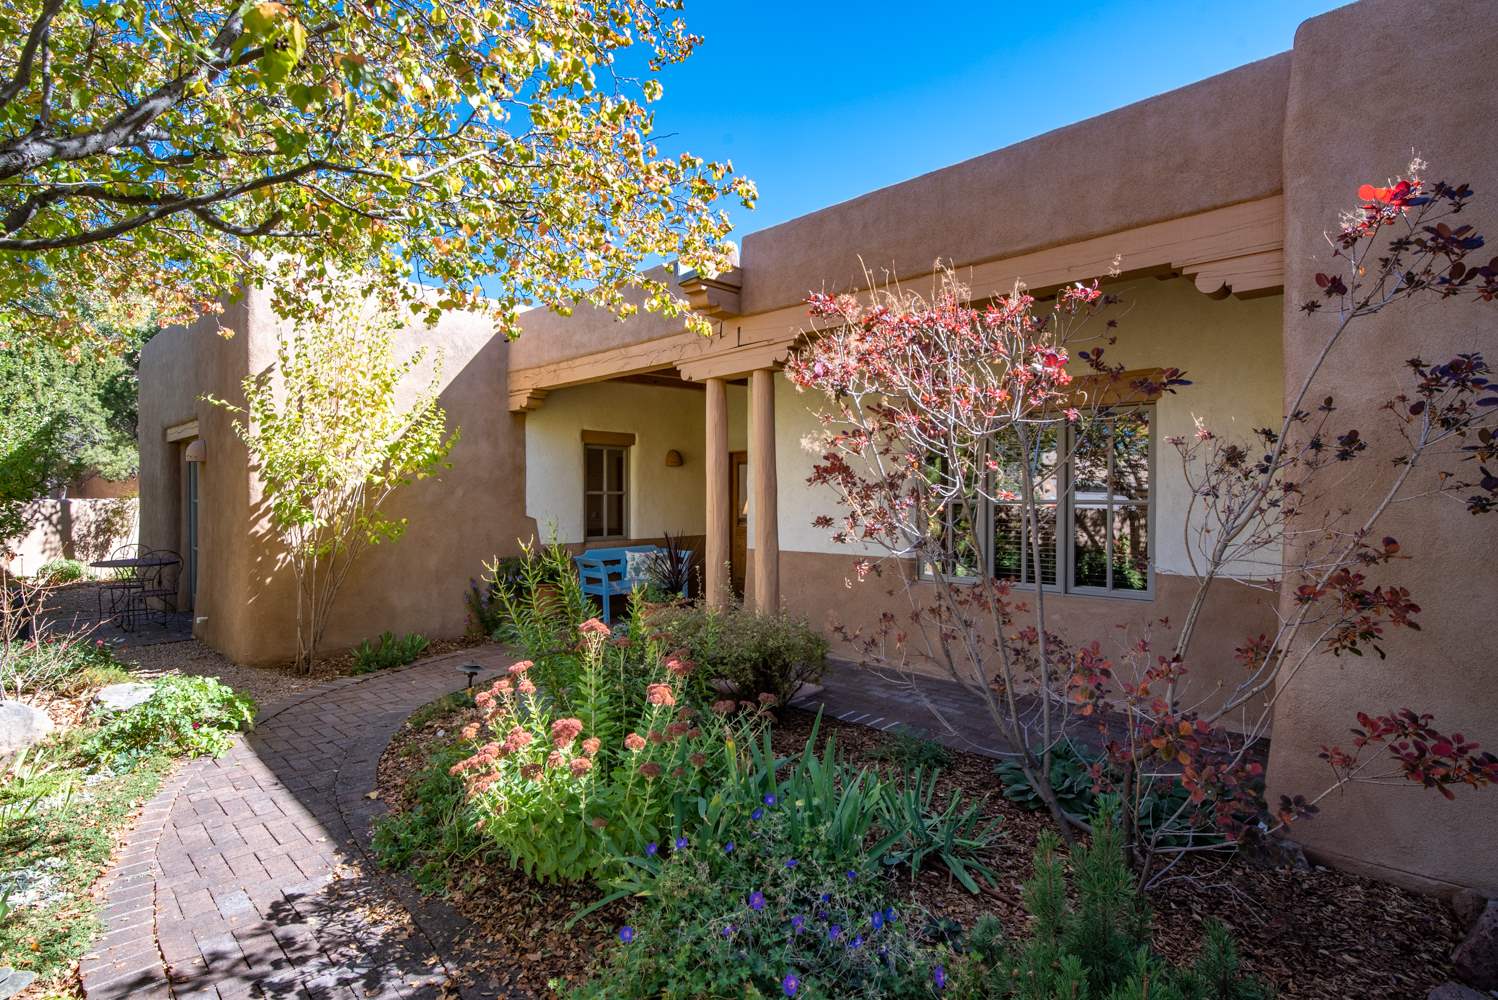 3101 Old Pecos Trail Unit 650 650, Santa Fe, New Mexico 87505, 3 Bedrooms Bedrooms, ,4 BathroomsBathrooms,Residential,For Sale,3101 Old Pecos Trail Unit 650 650,202101051